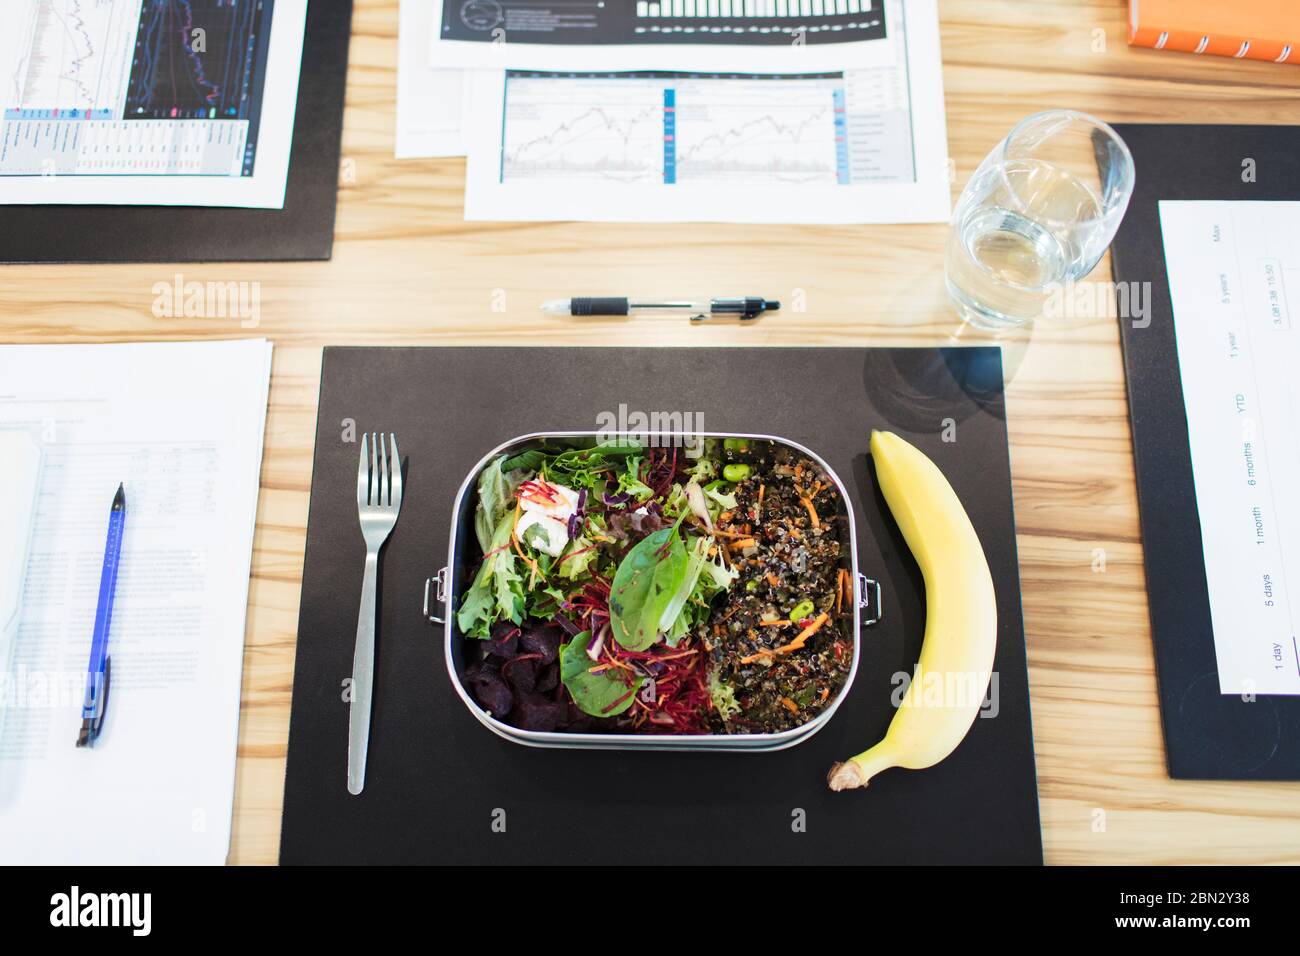 Healthy salad and banana lunch on conference table Stock Photo